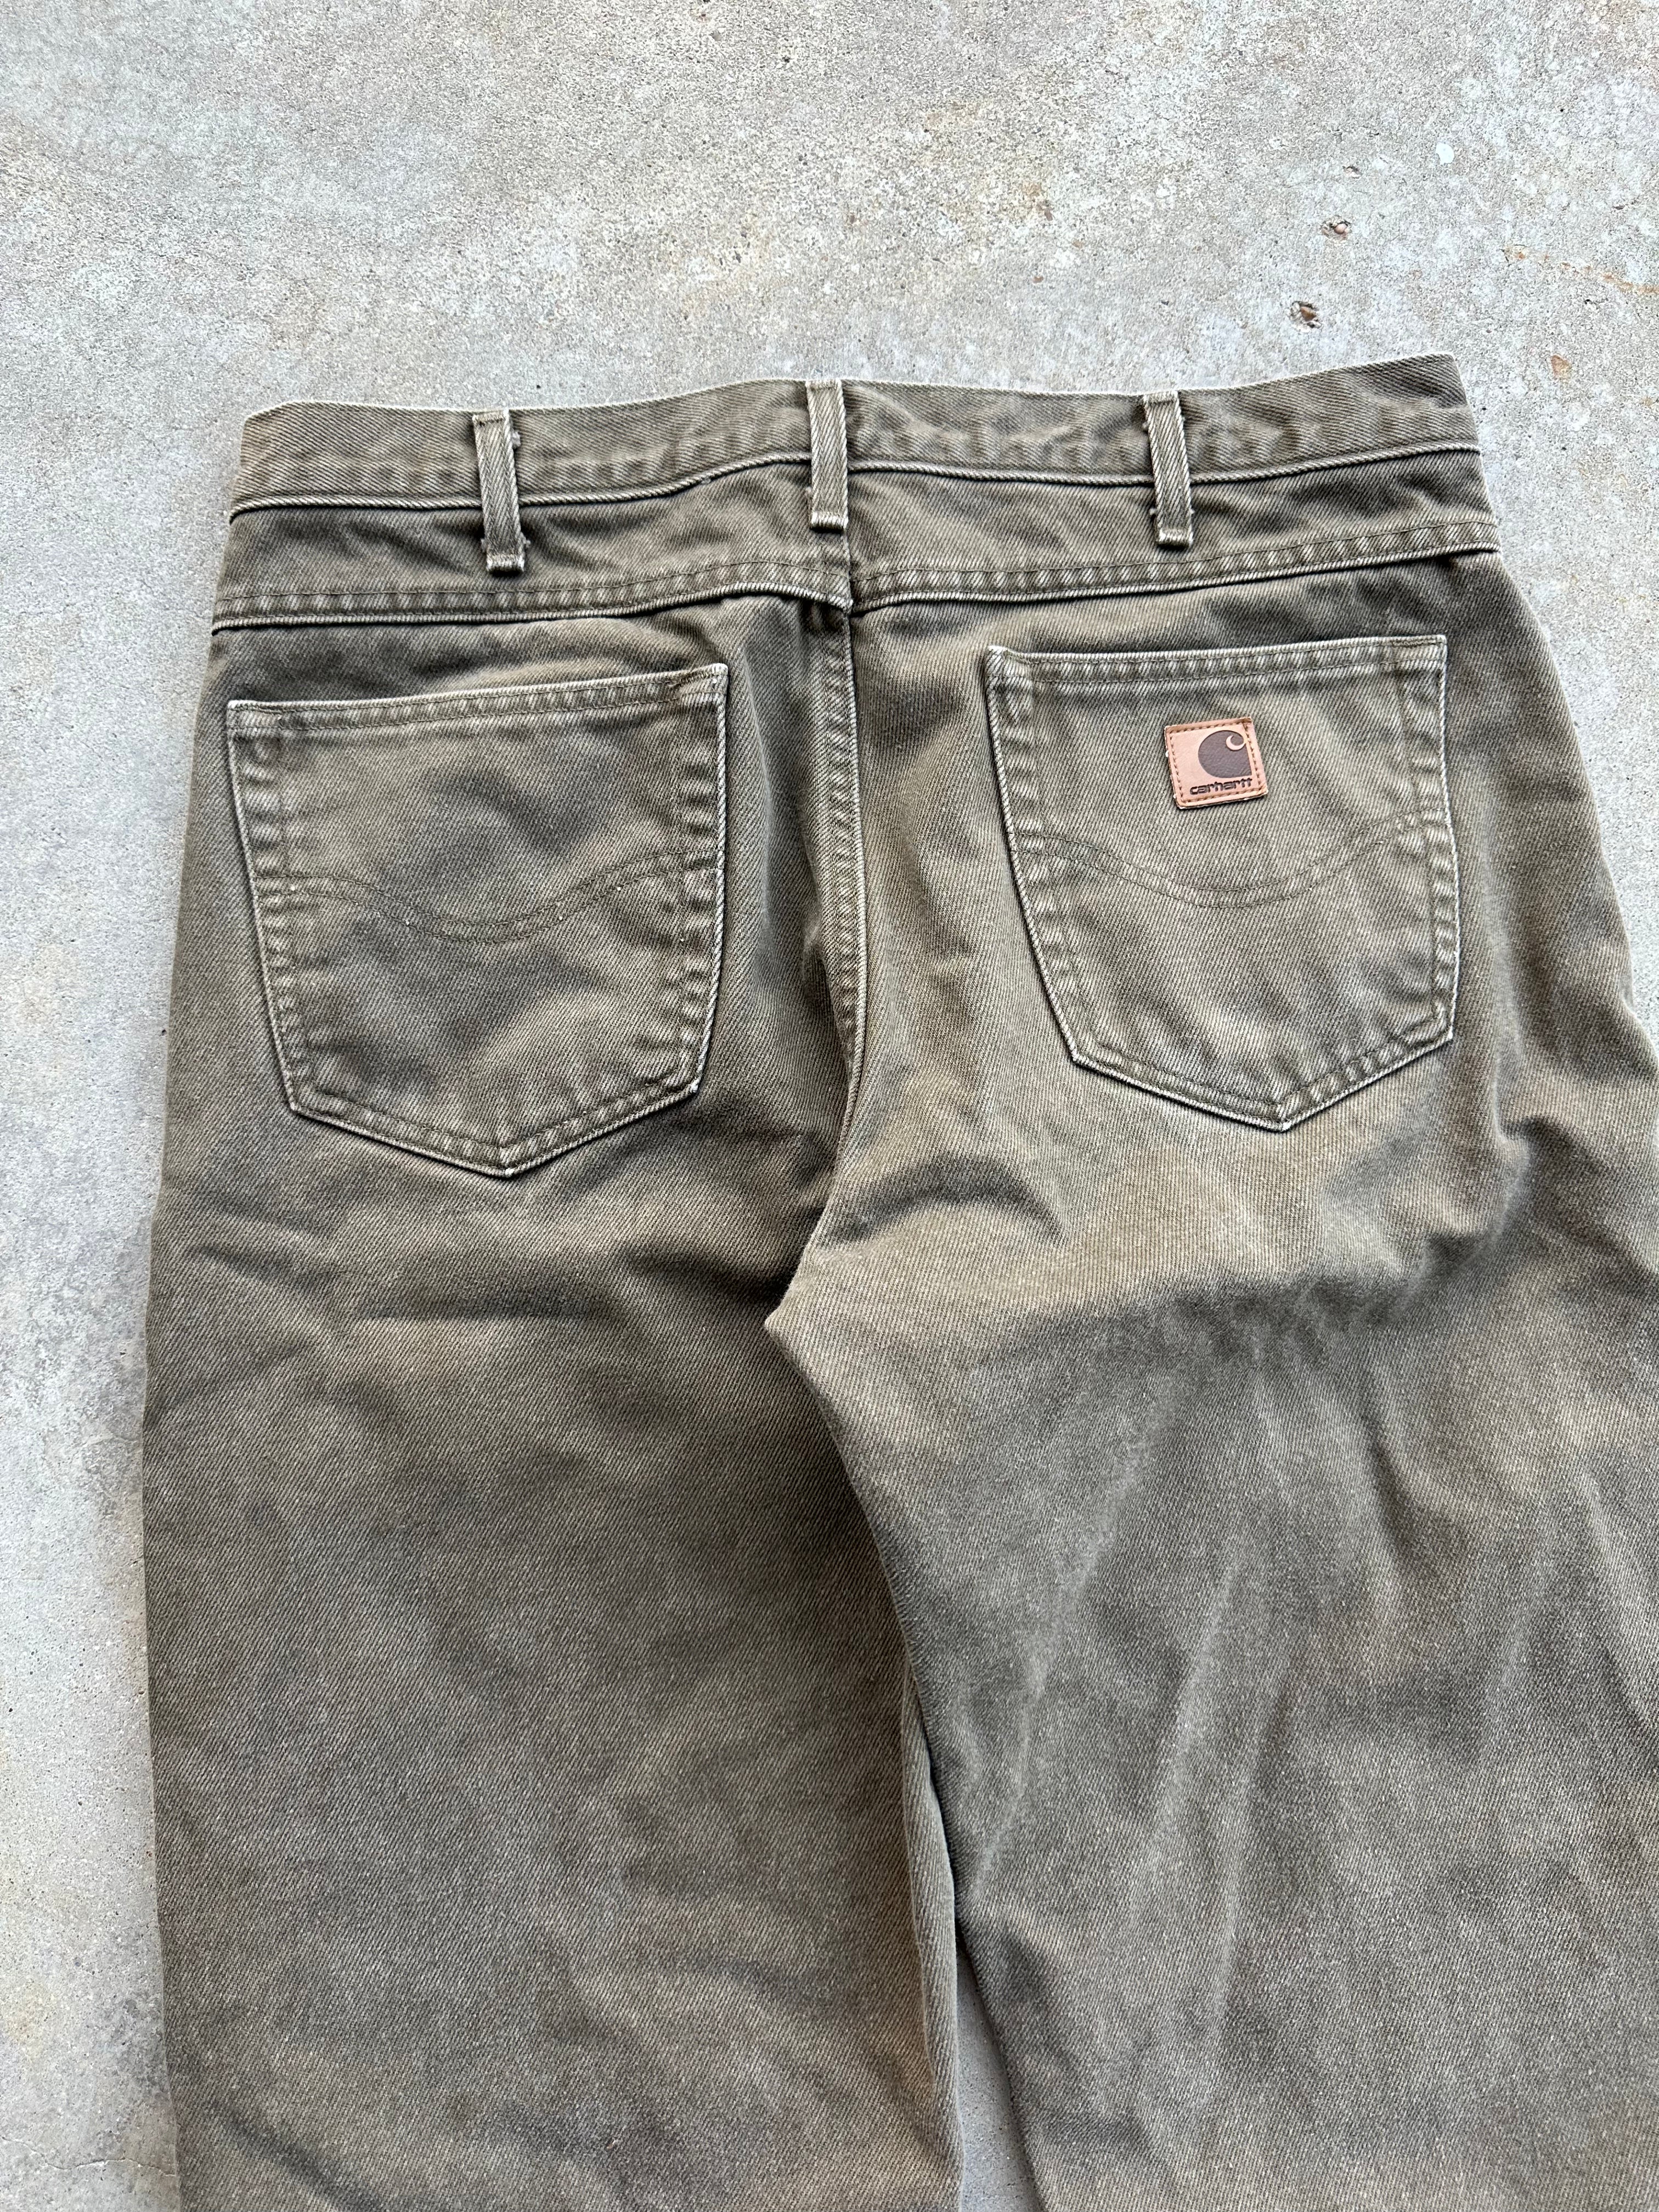 Vintage Carhartt Flannel Lined Jeans (34"x29")